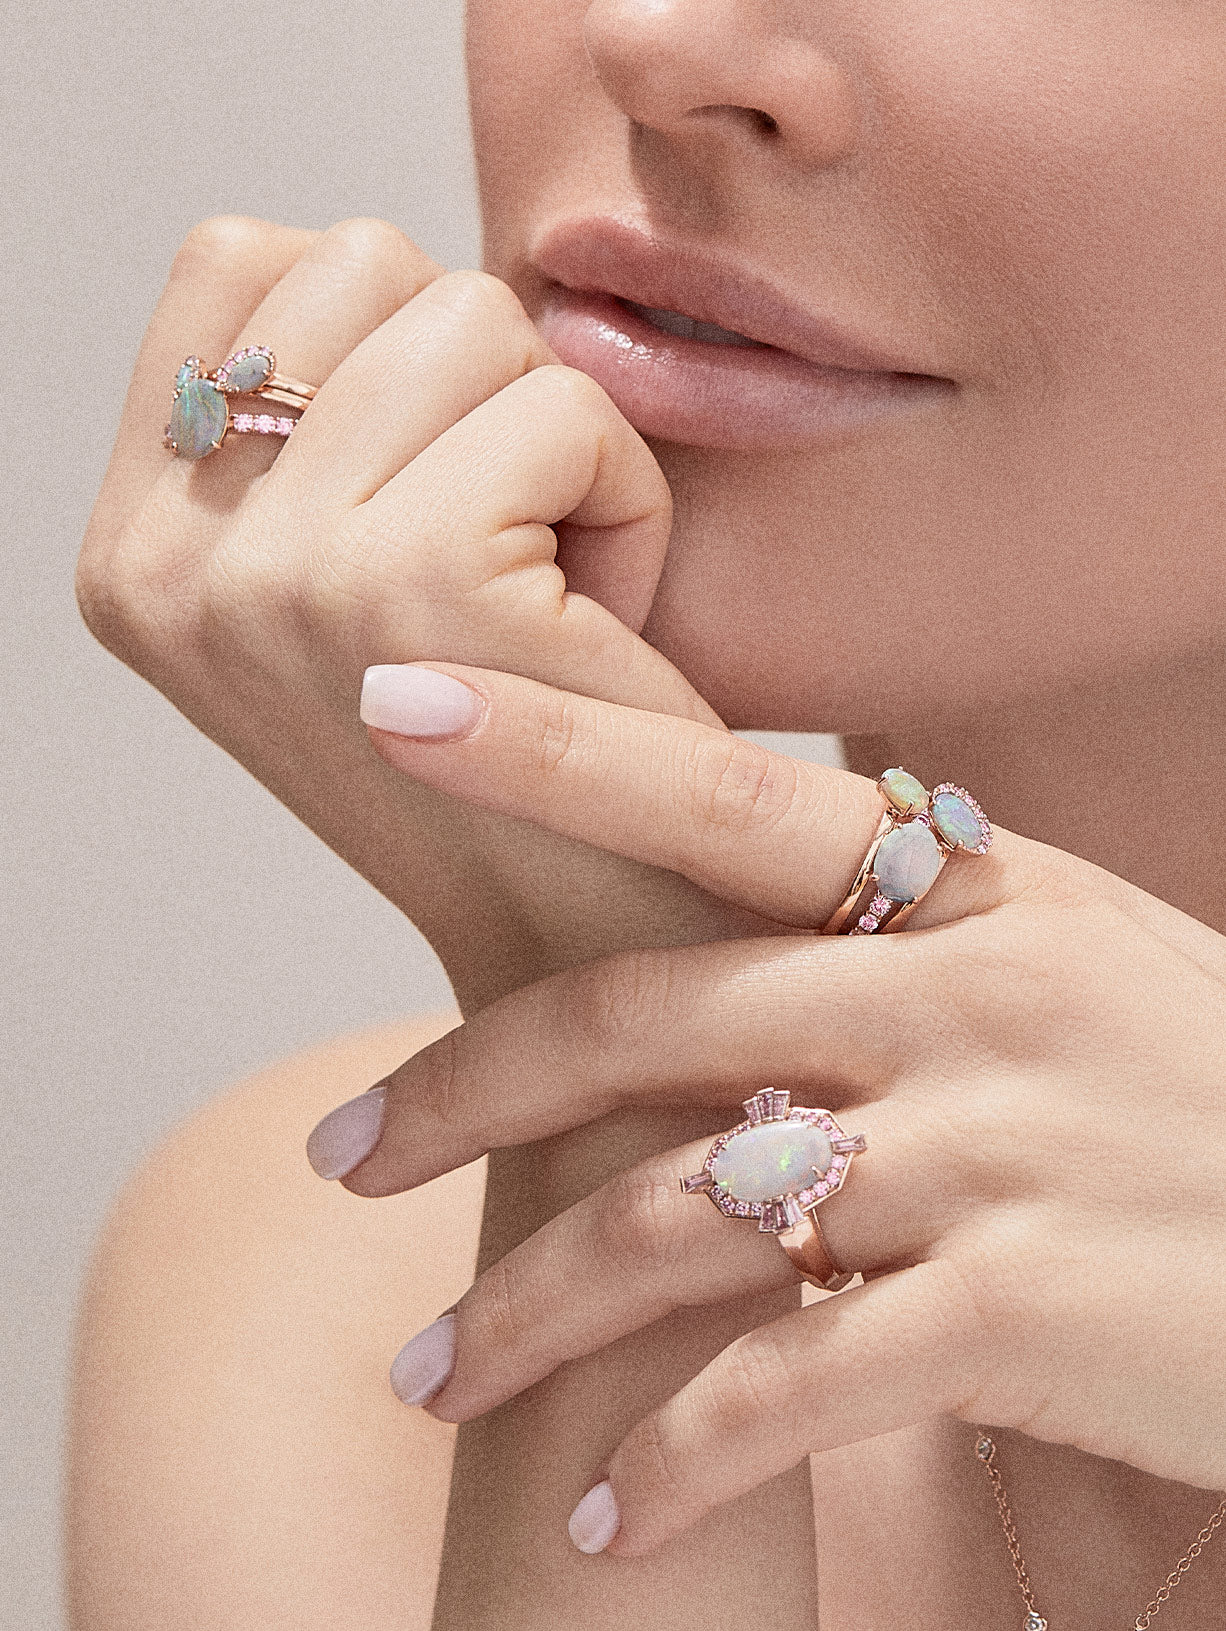 Argyle Pink™ Diamond and Opal Stacking Ring - Pink Diamonds, J FINE - J Fine, Rings - Pink Diamond Jewelry, argyle-pink™-diamond-and-opal-stacking-ring-by-j-fine-4 - Argyle Pink Diamonds